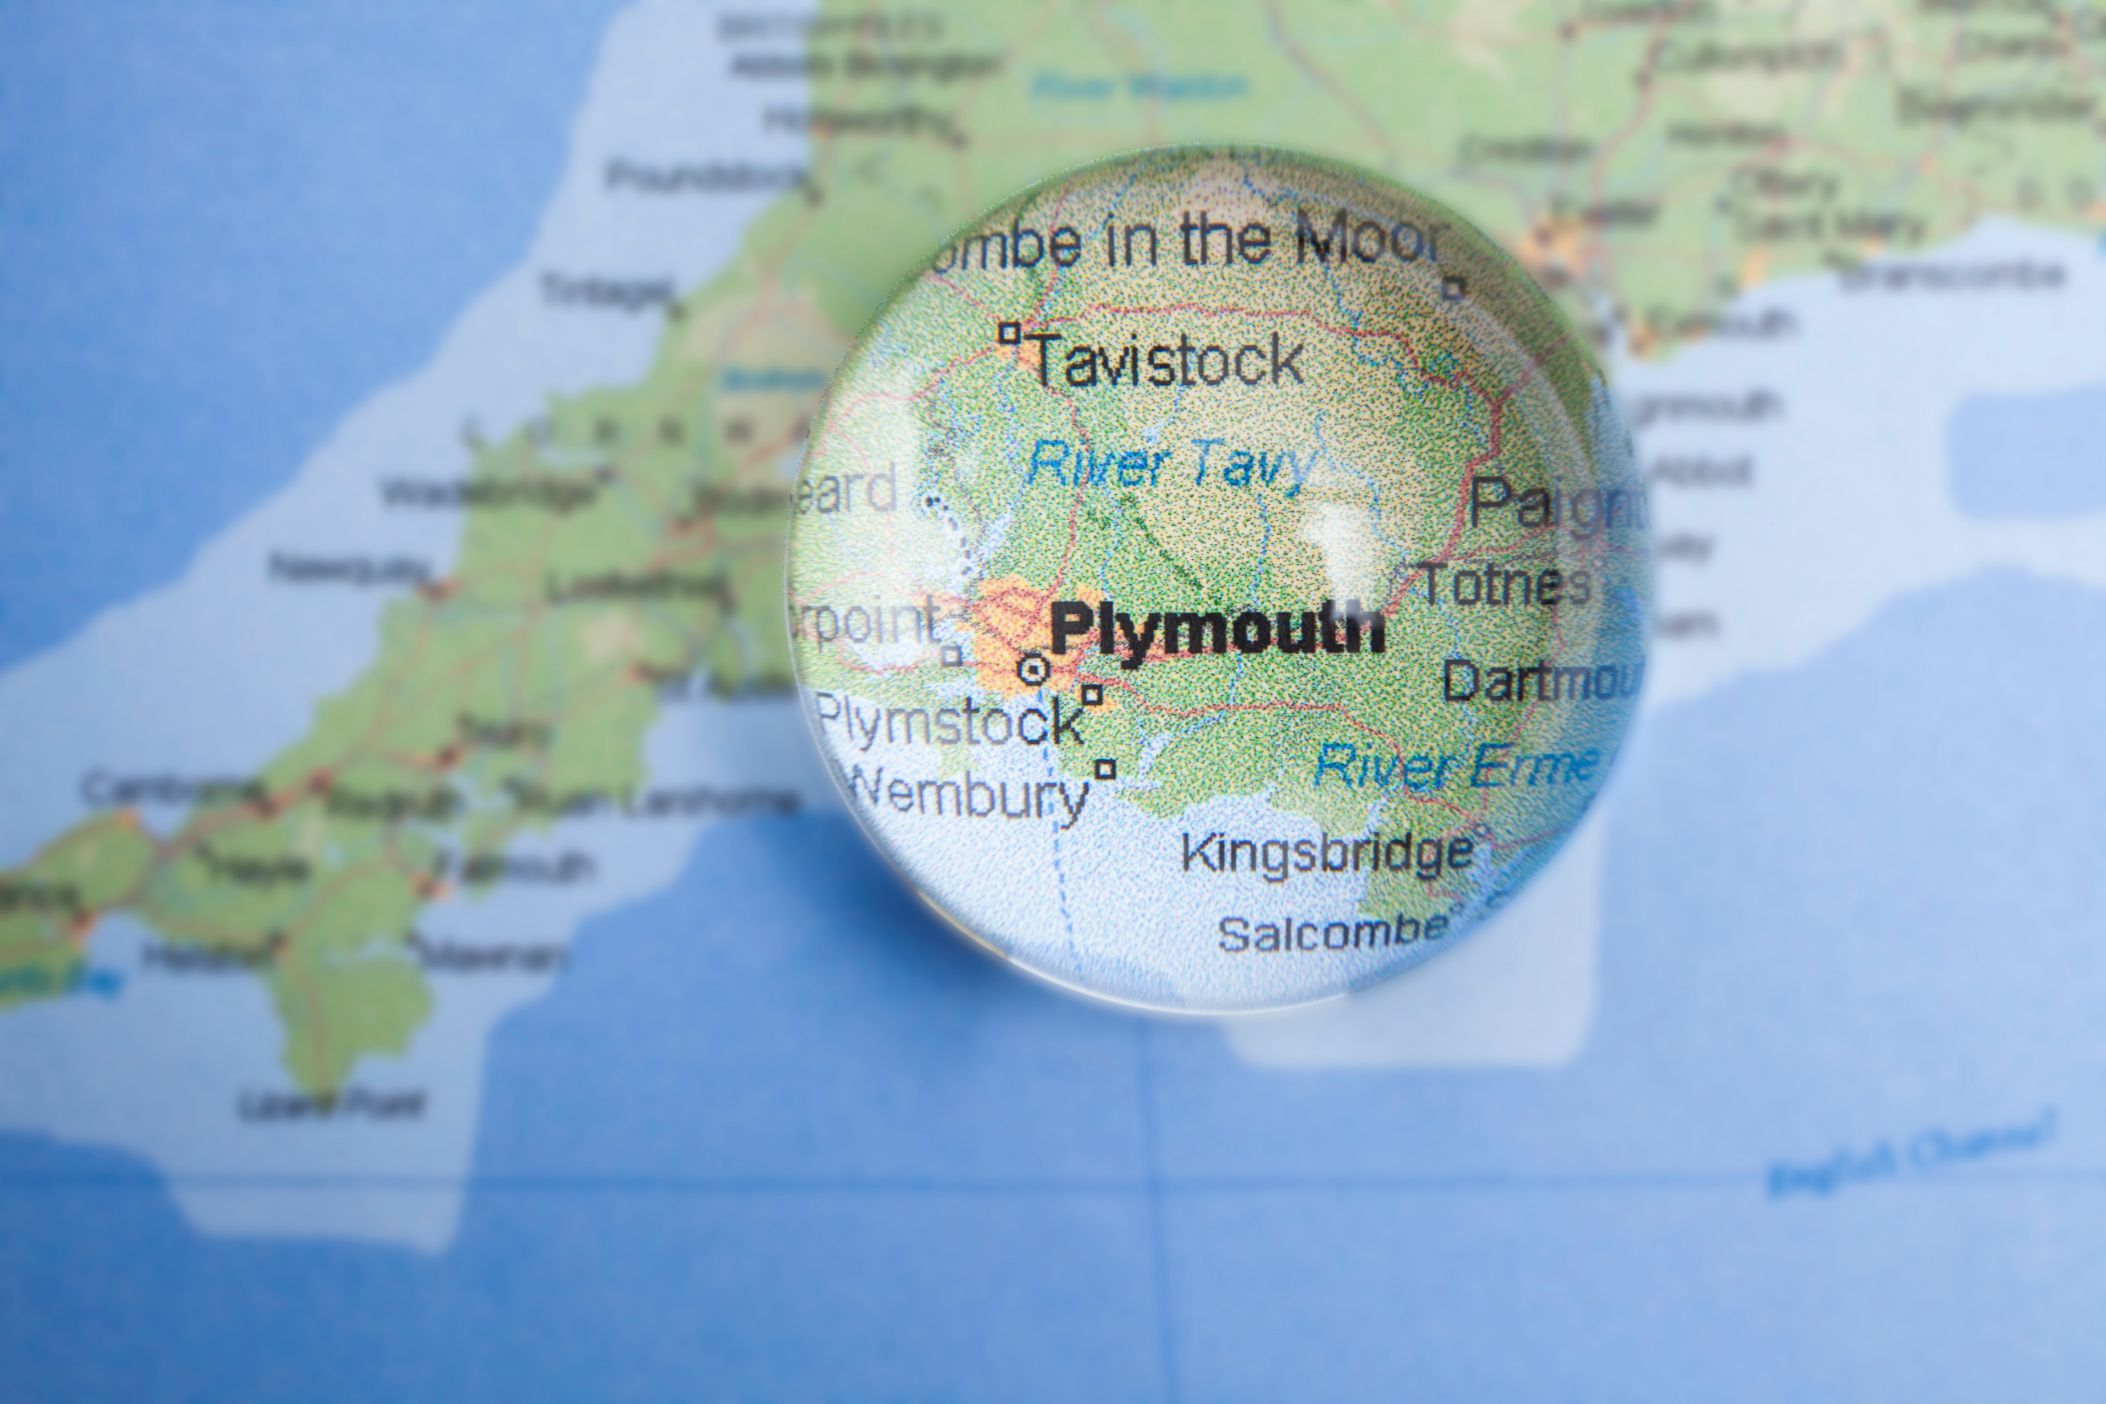 A guide to Plymouths live music venues